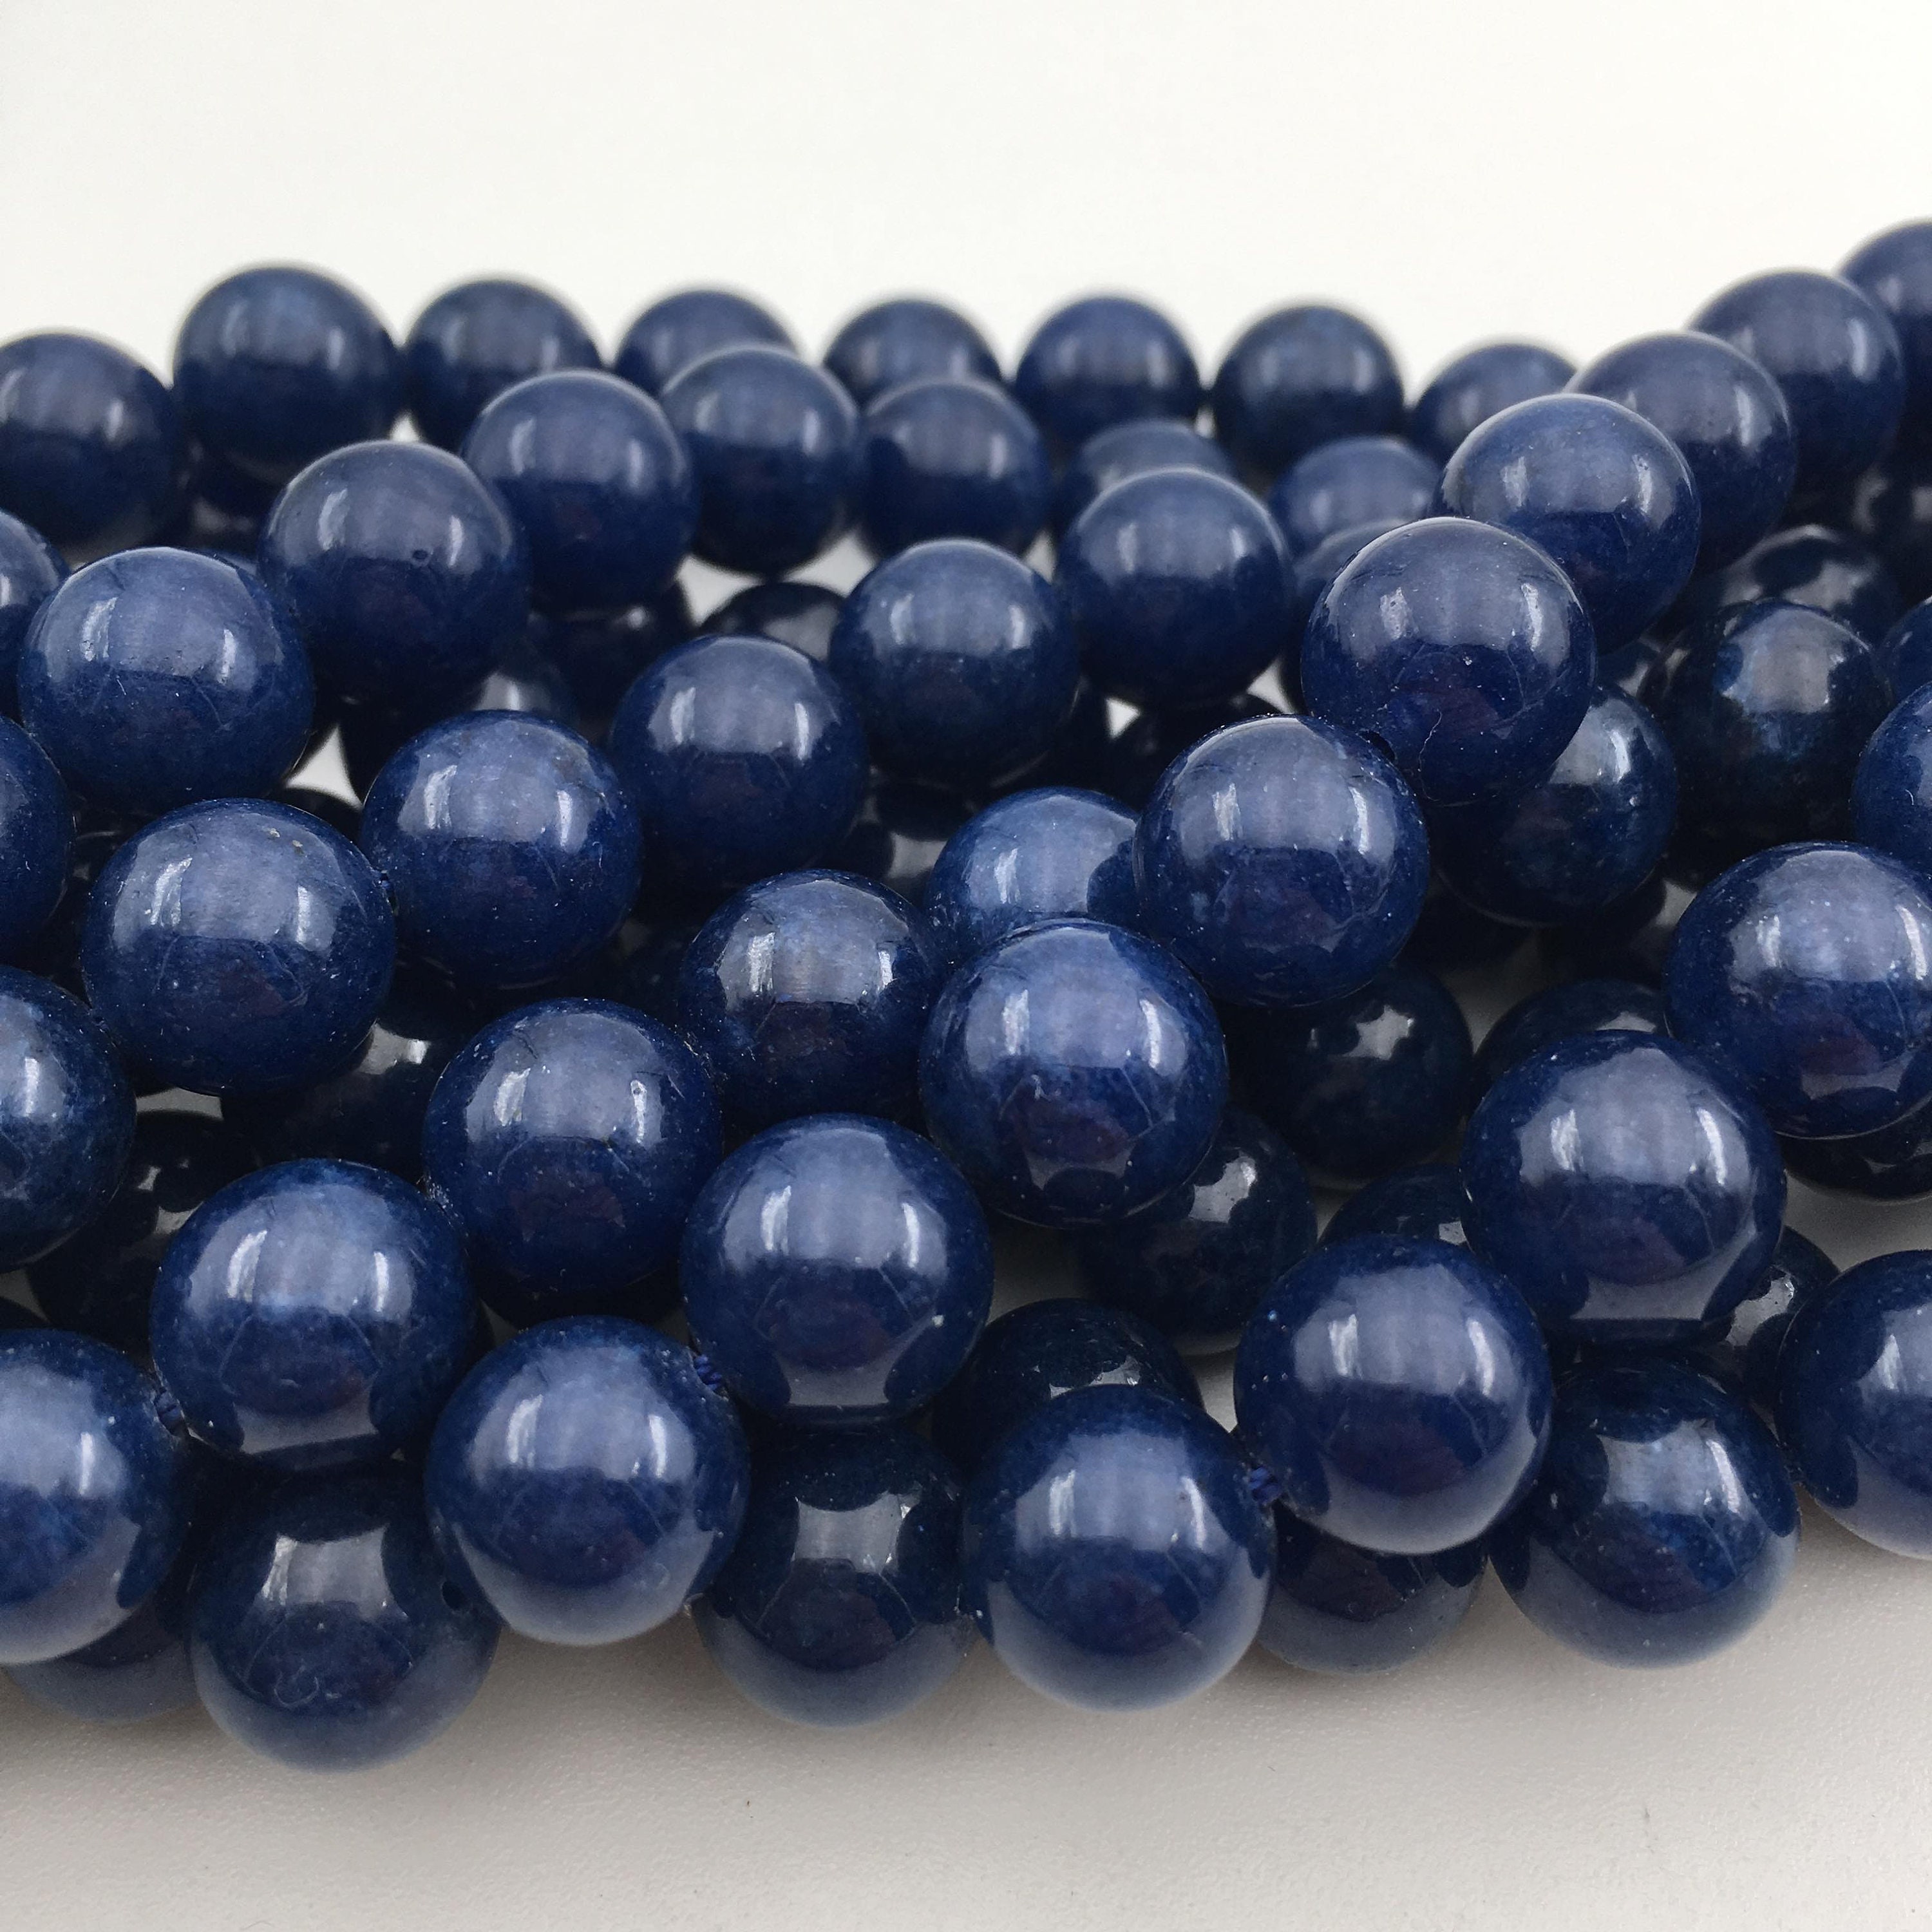 Sapphire Blue Dyed Quartz Smooth Round Beads 4mm 6mm 8mm 10mm - Etsy